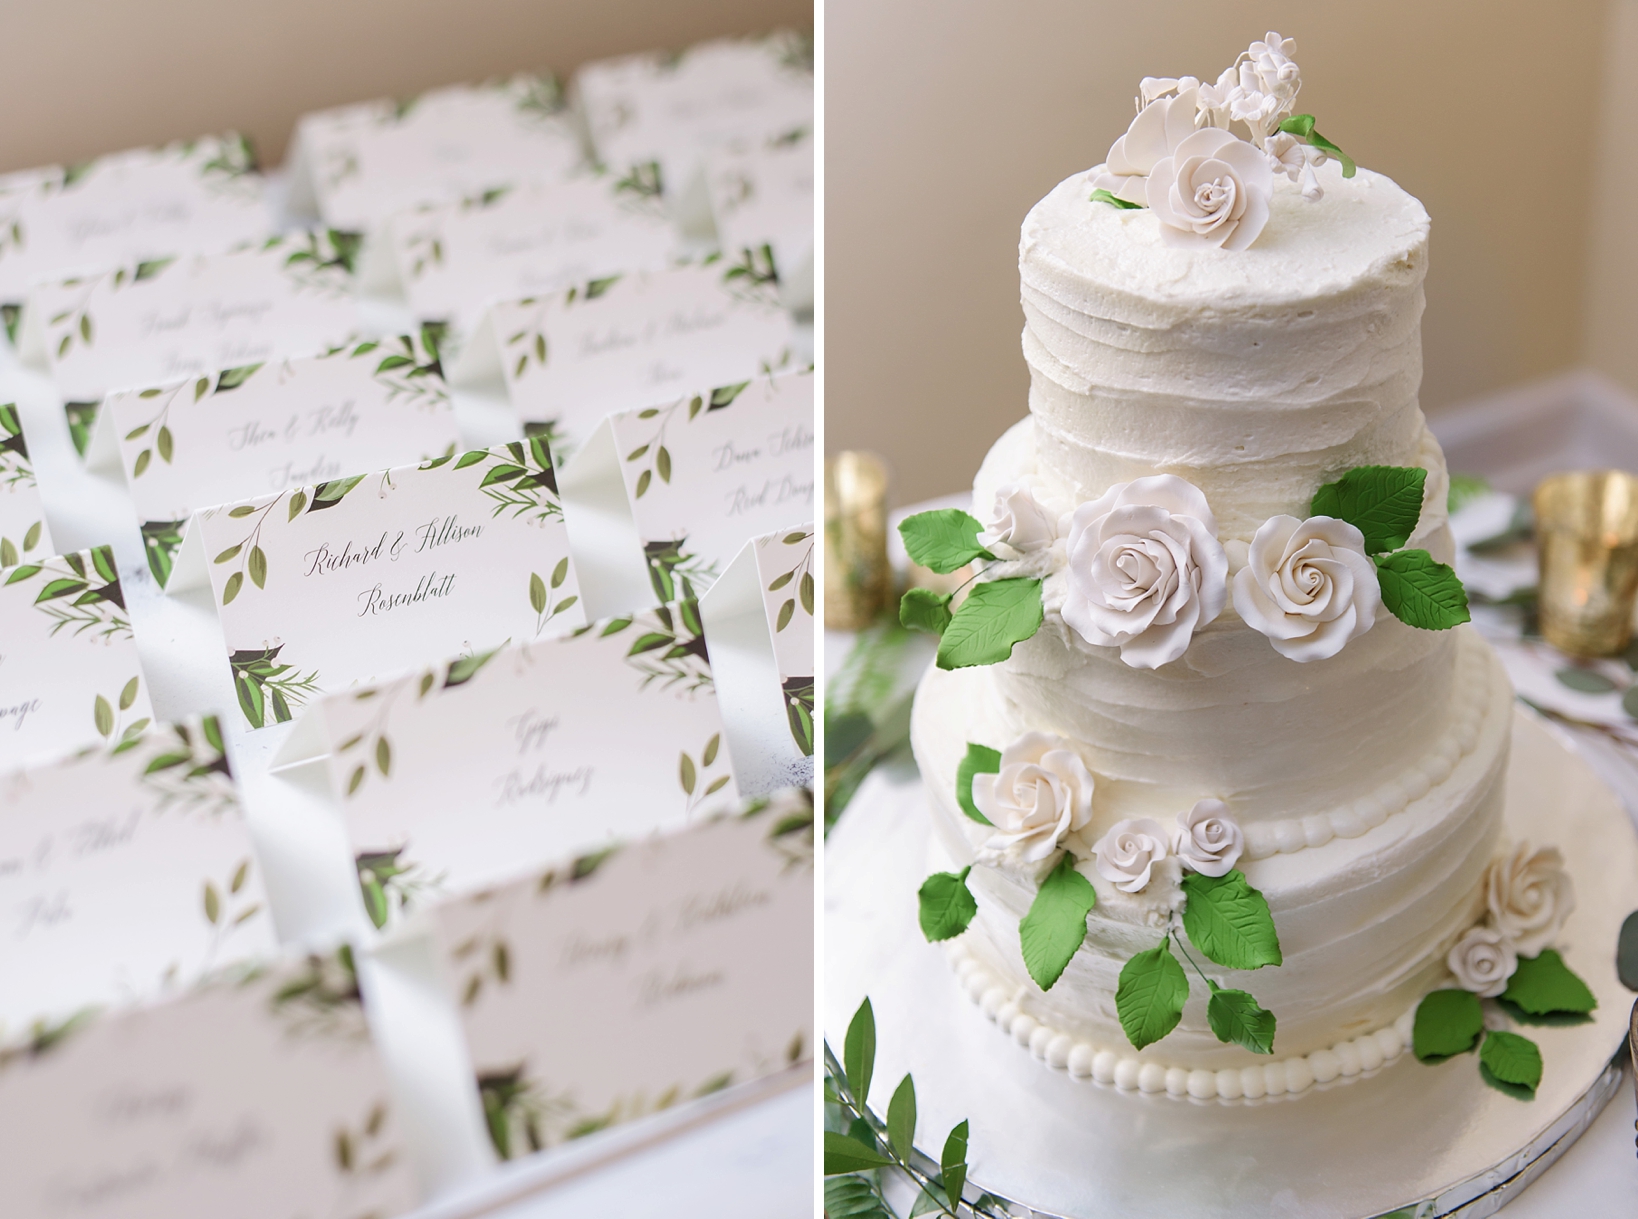 The wedding cake with candy roses and matching table place cards